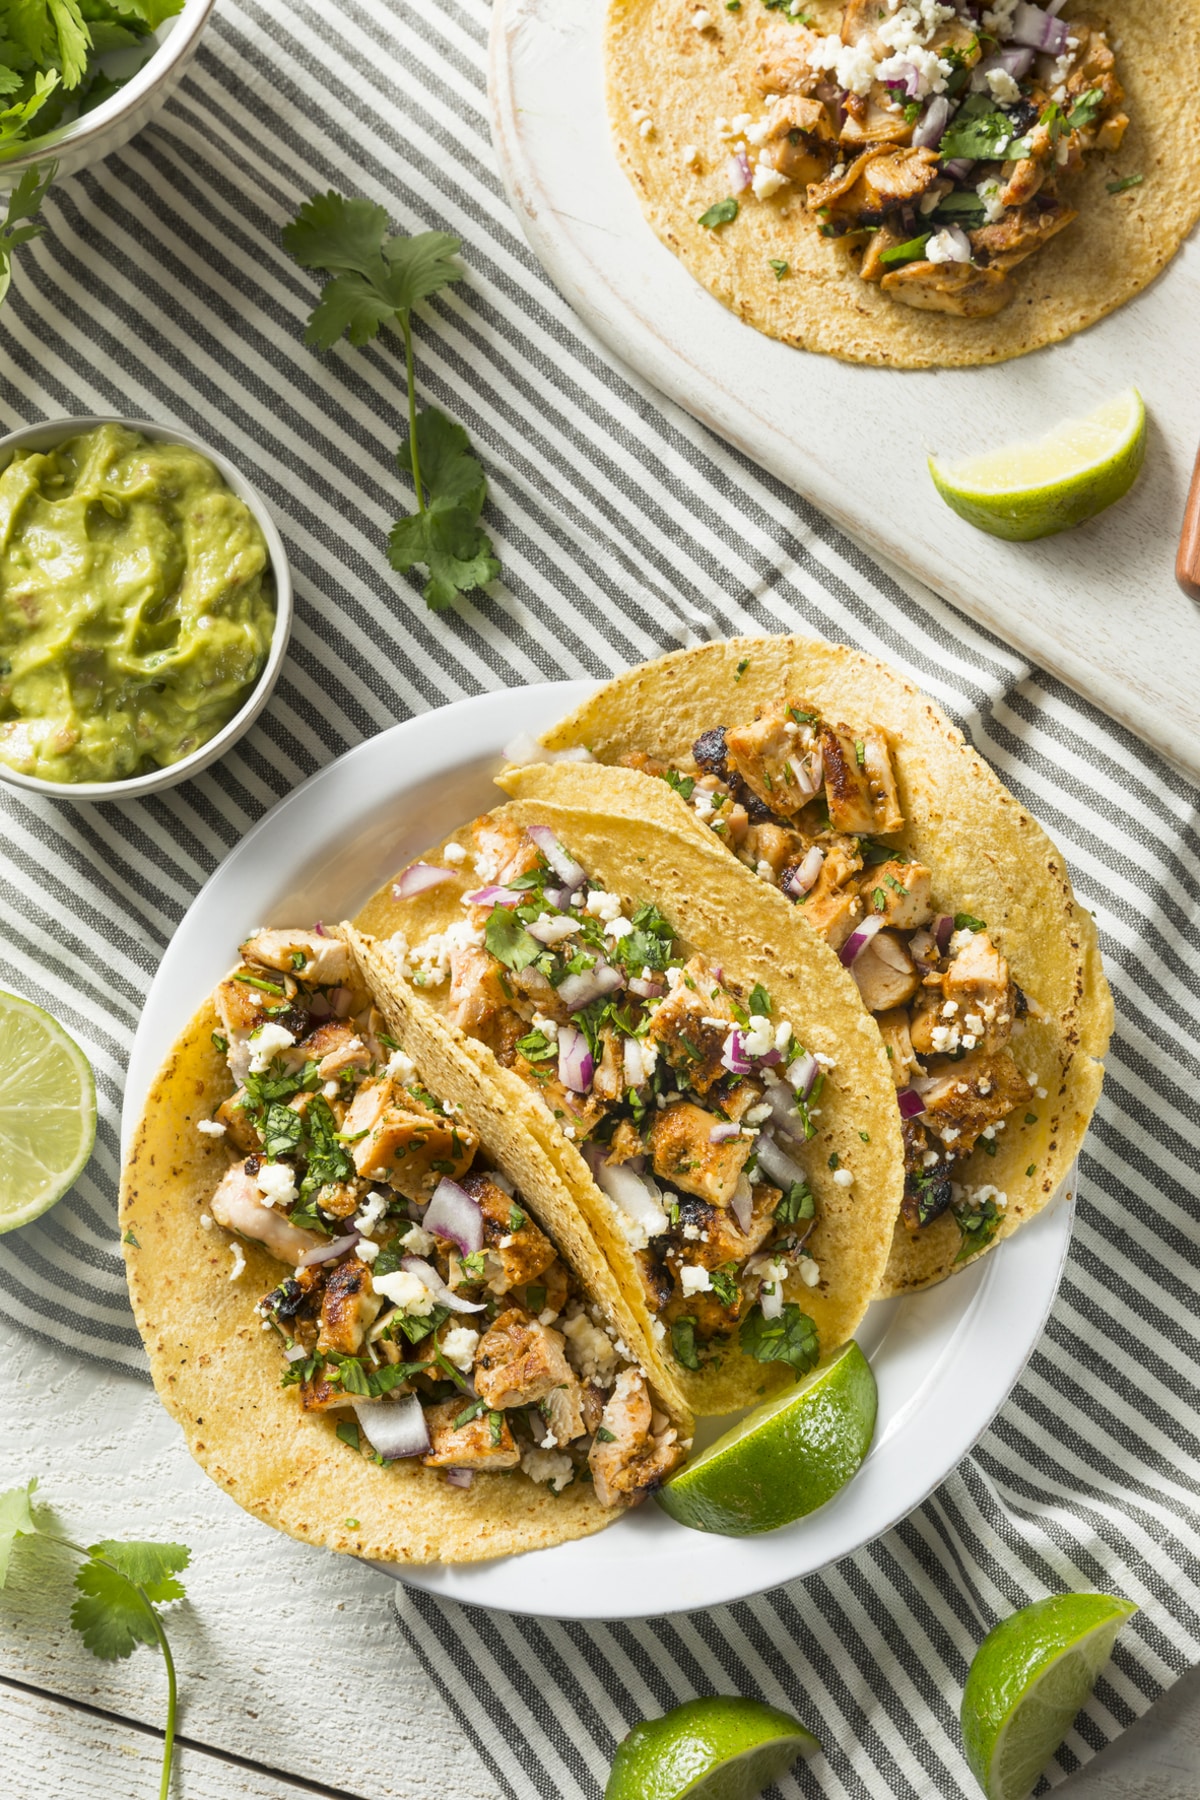 Chicken Tinga Tacos viewed from the top down. 3 tacos are assemble and on a plate. Guacamole and limes are served as garnishes on the side.